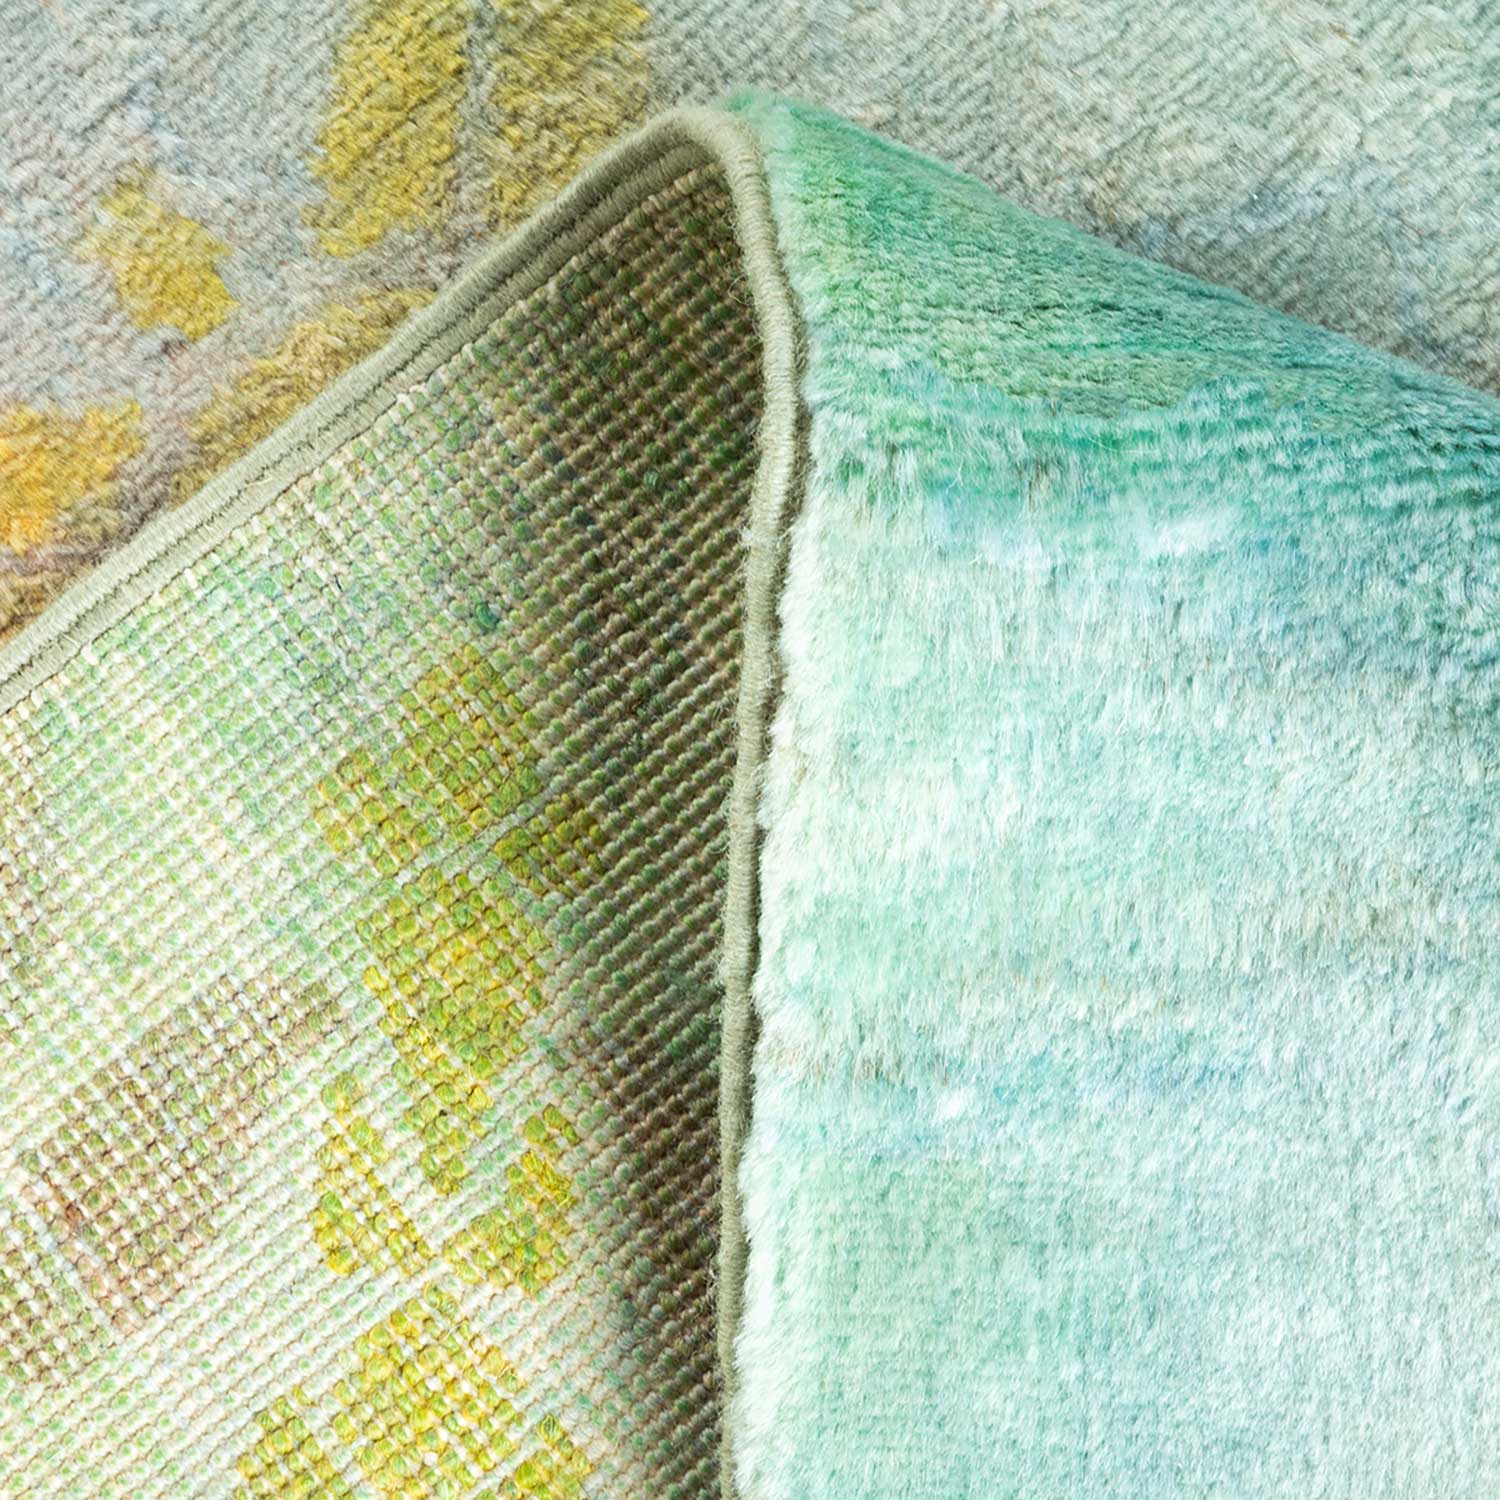 A detailed close-up of a folded fabric with various textures and colors.